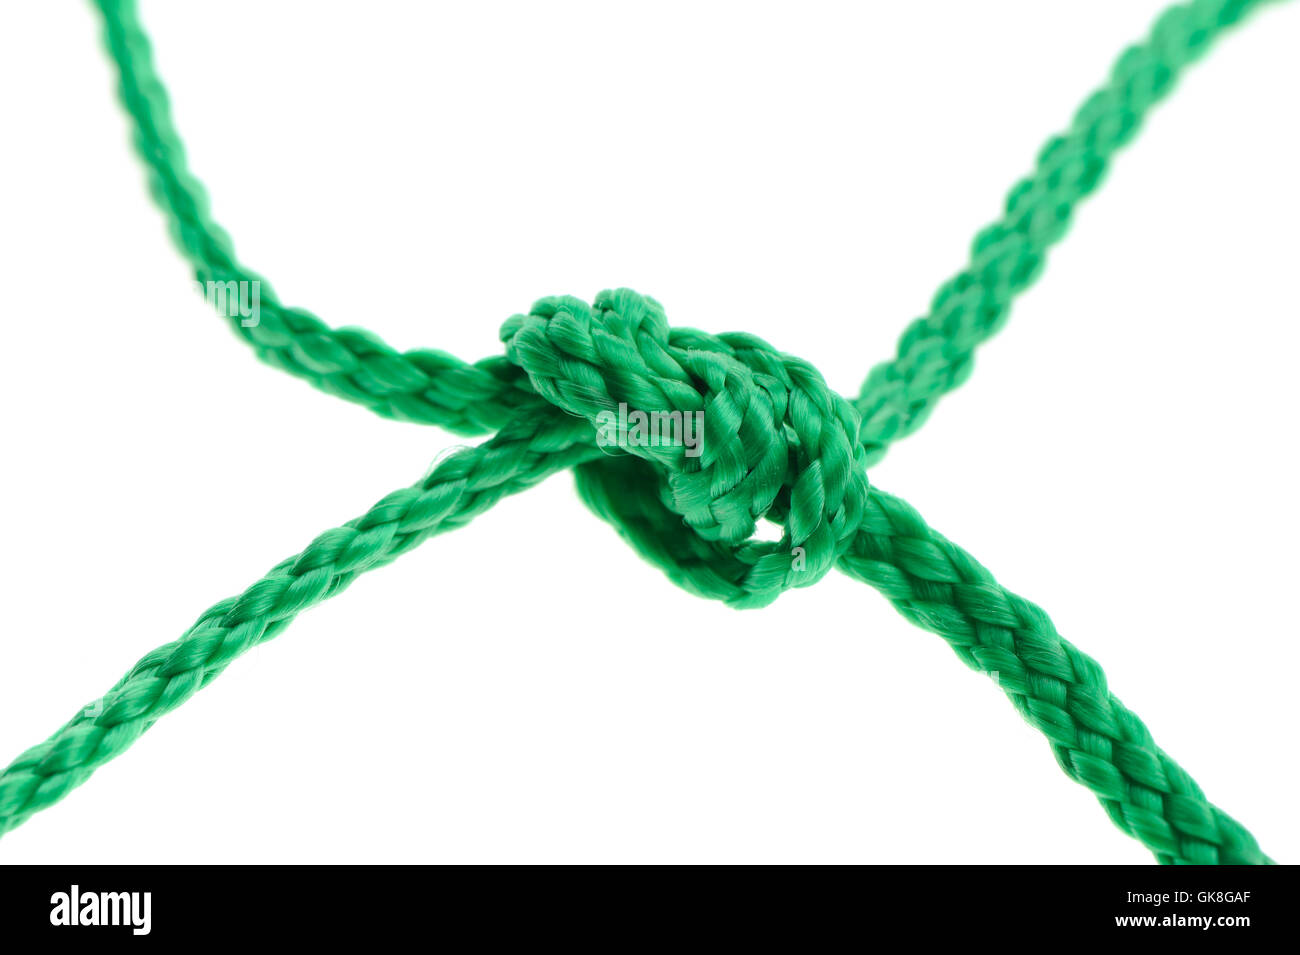 Knot on a cord Stock Photo